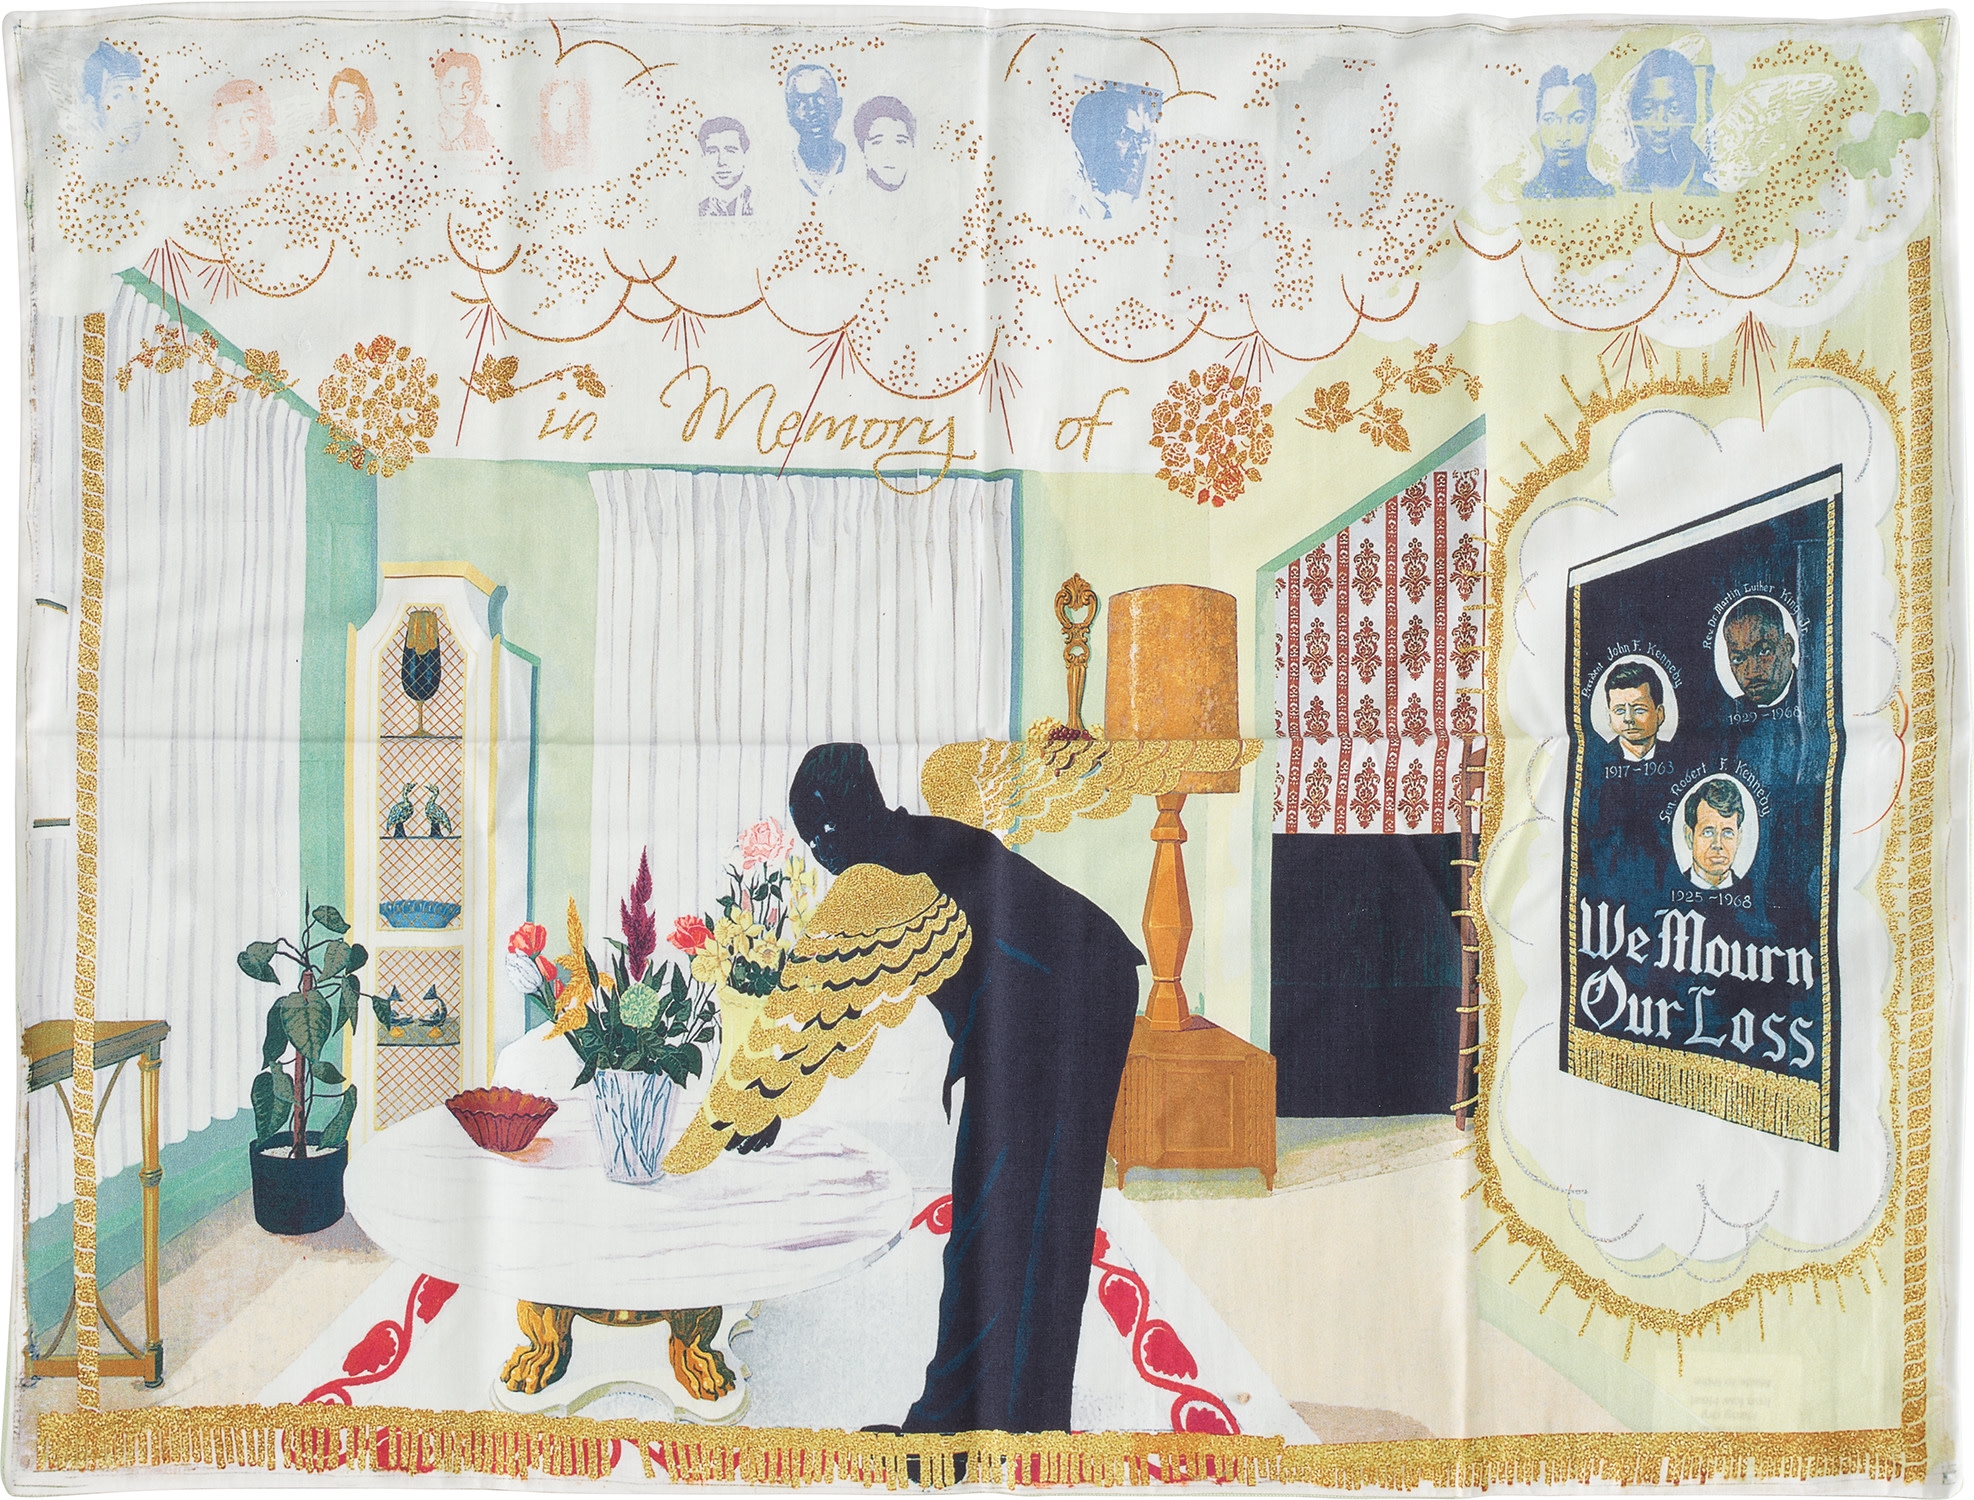 Souvenir I by Kerry James Marshall, 2017, July 2017